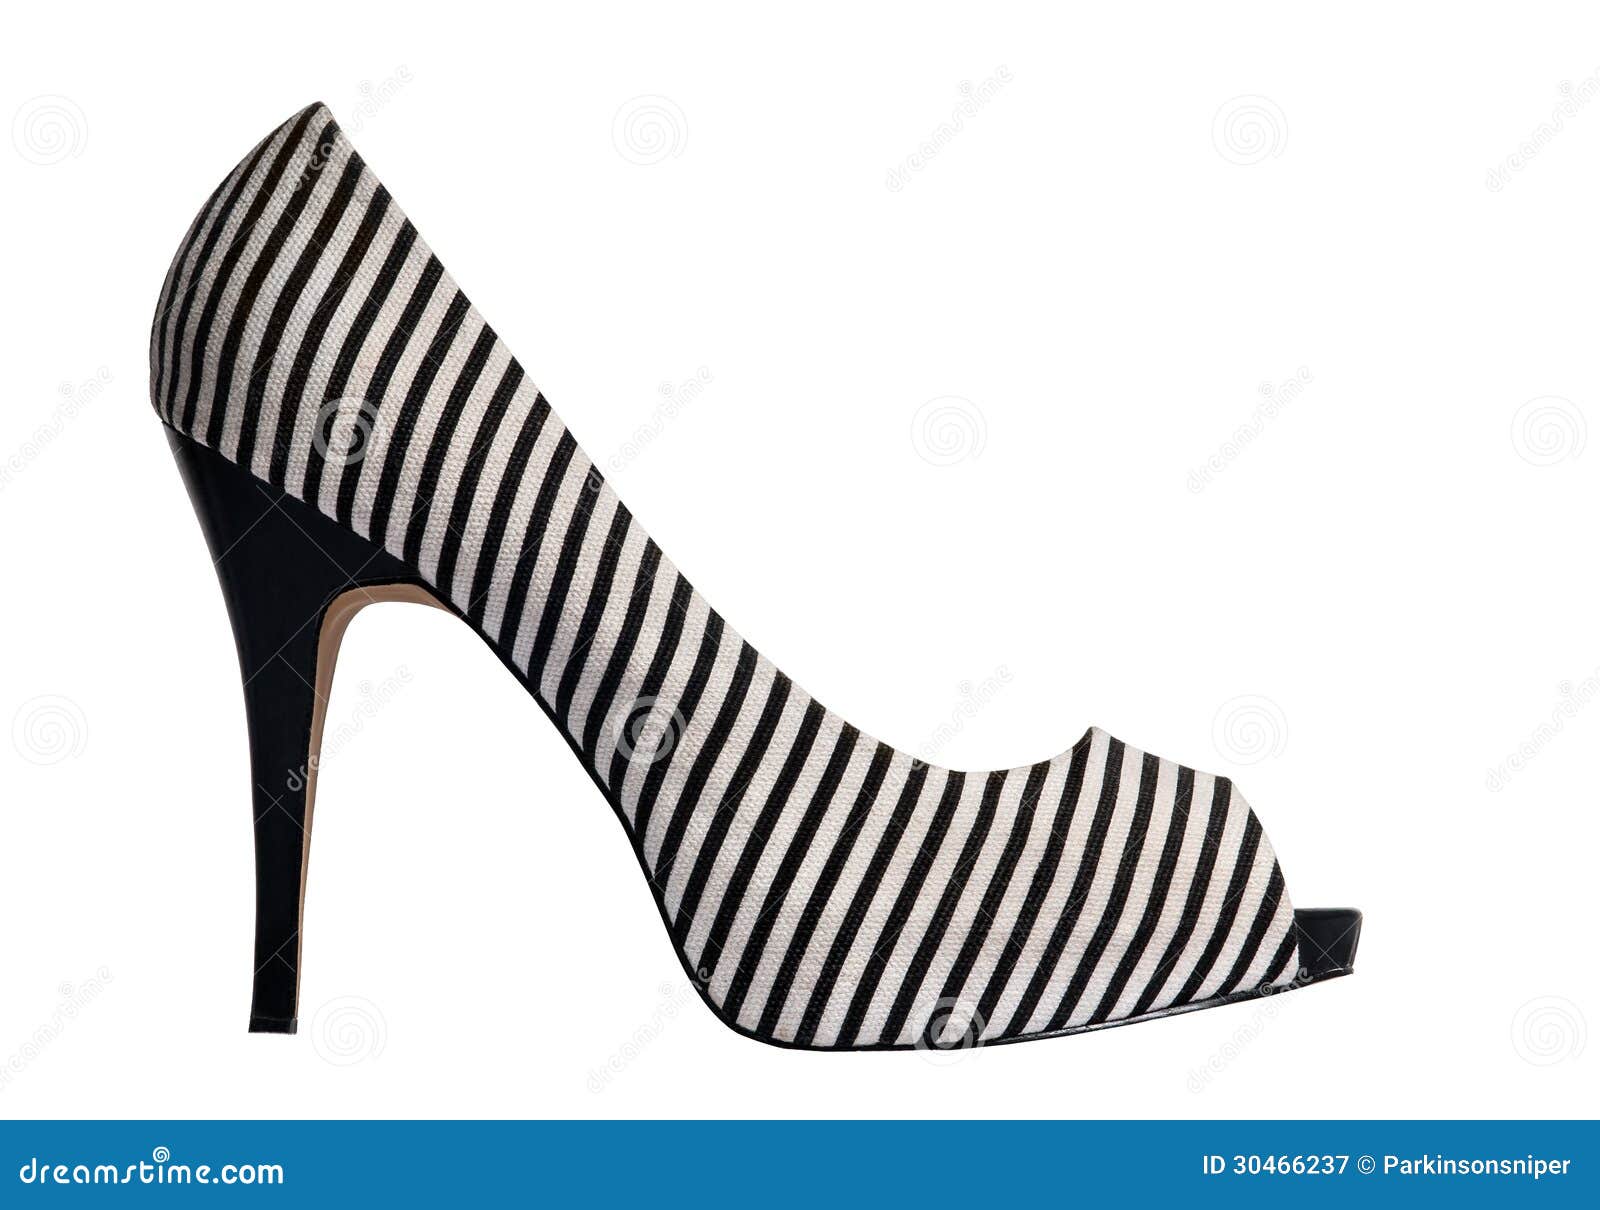 Natassia Crystal - Geekette in high heels: White dress with black strappy  stripes: the case of the crashed camera